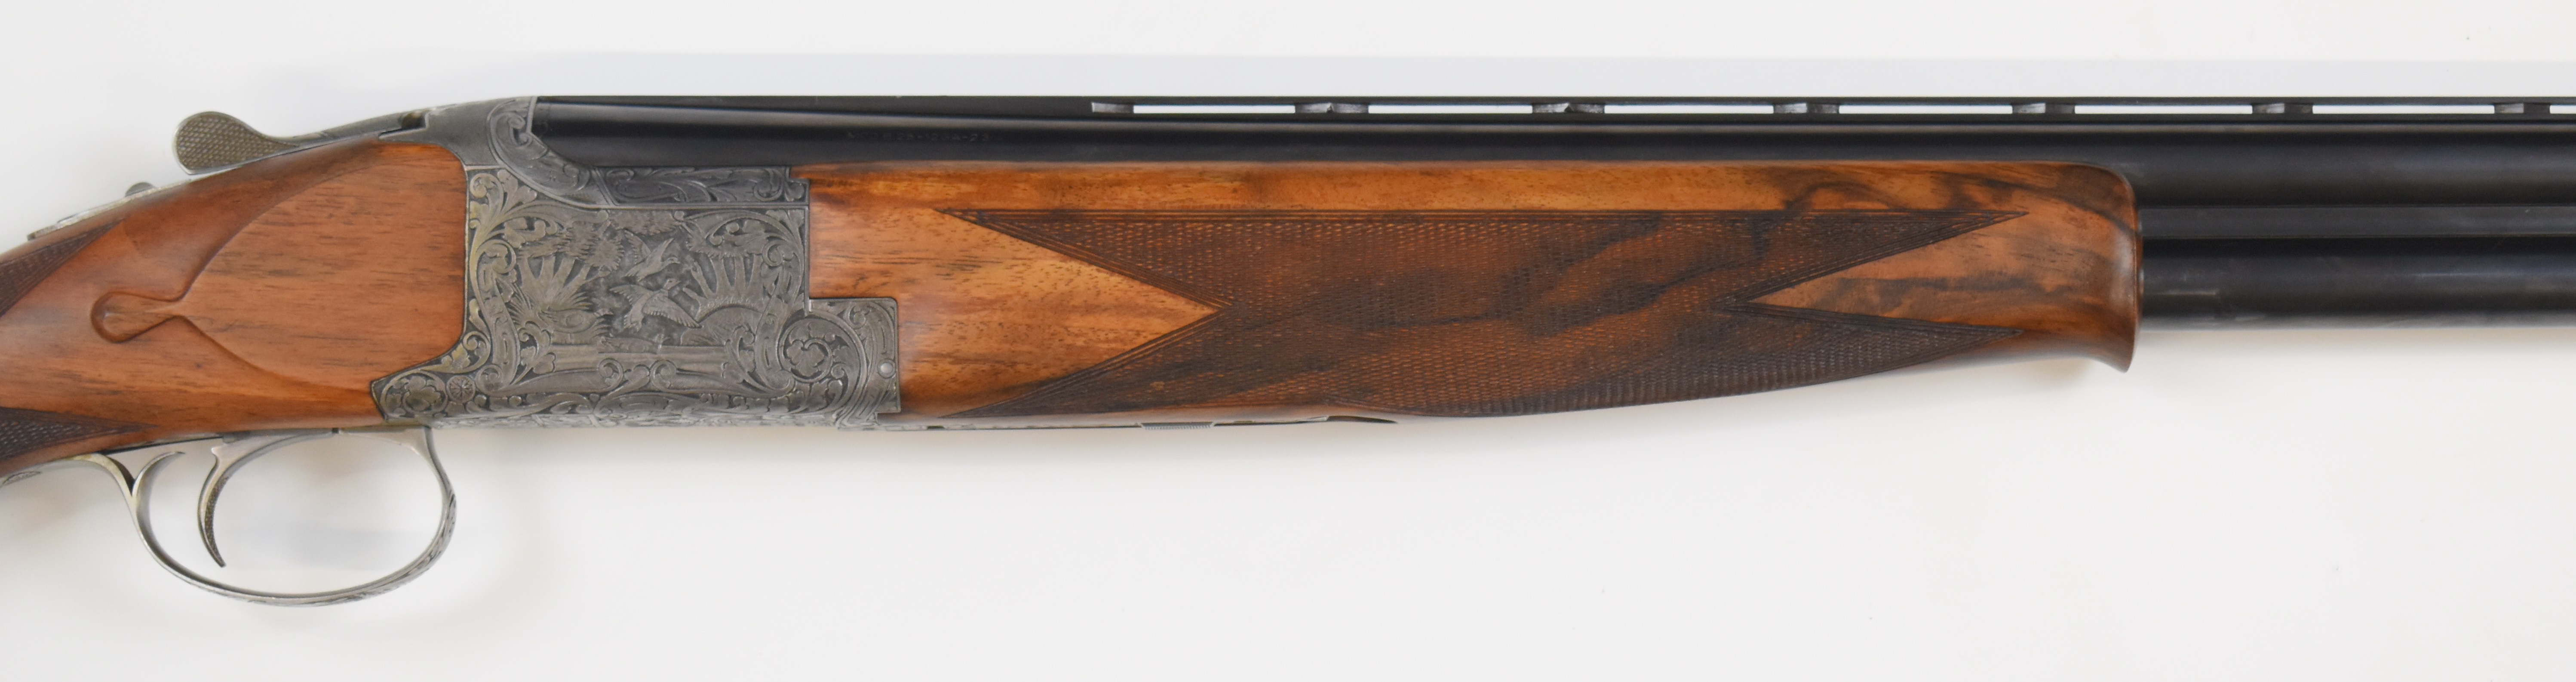 Browning B25 Diana 12 bore over and under ejector shotgun with Pierre Lallemand engraved scenes of - Image 19 of 30